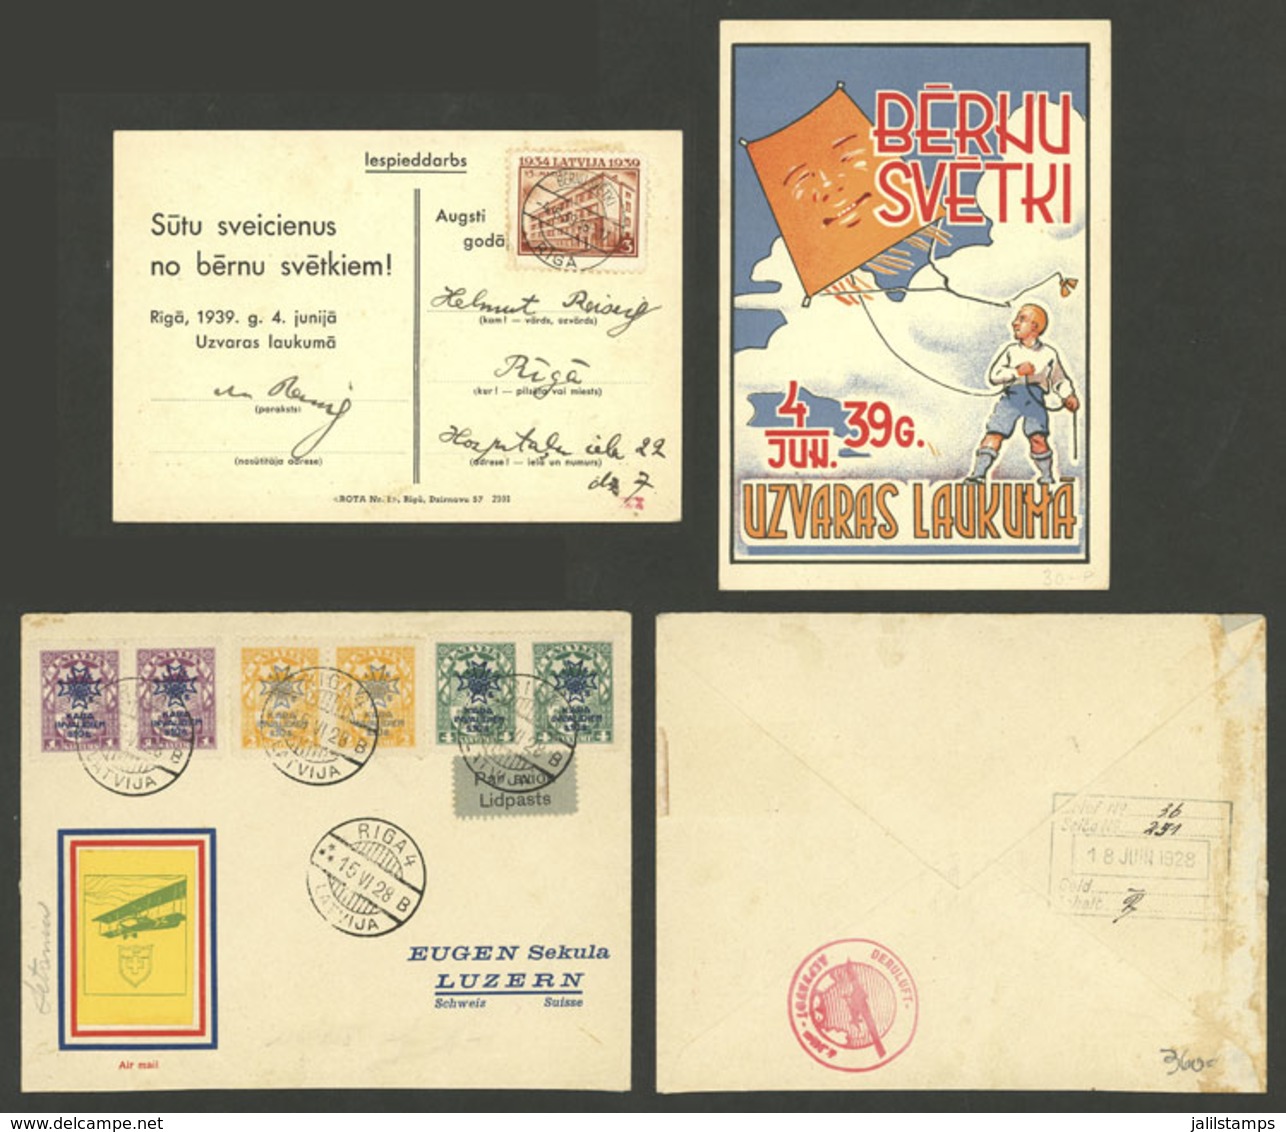 LATVIA: Cover Of 1928 And Card Of 1939, Interesting Marks And Frankings, VF Quality! - Lettonie